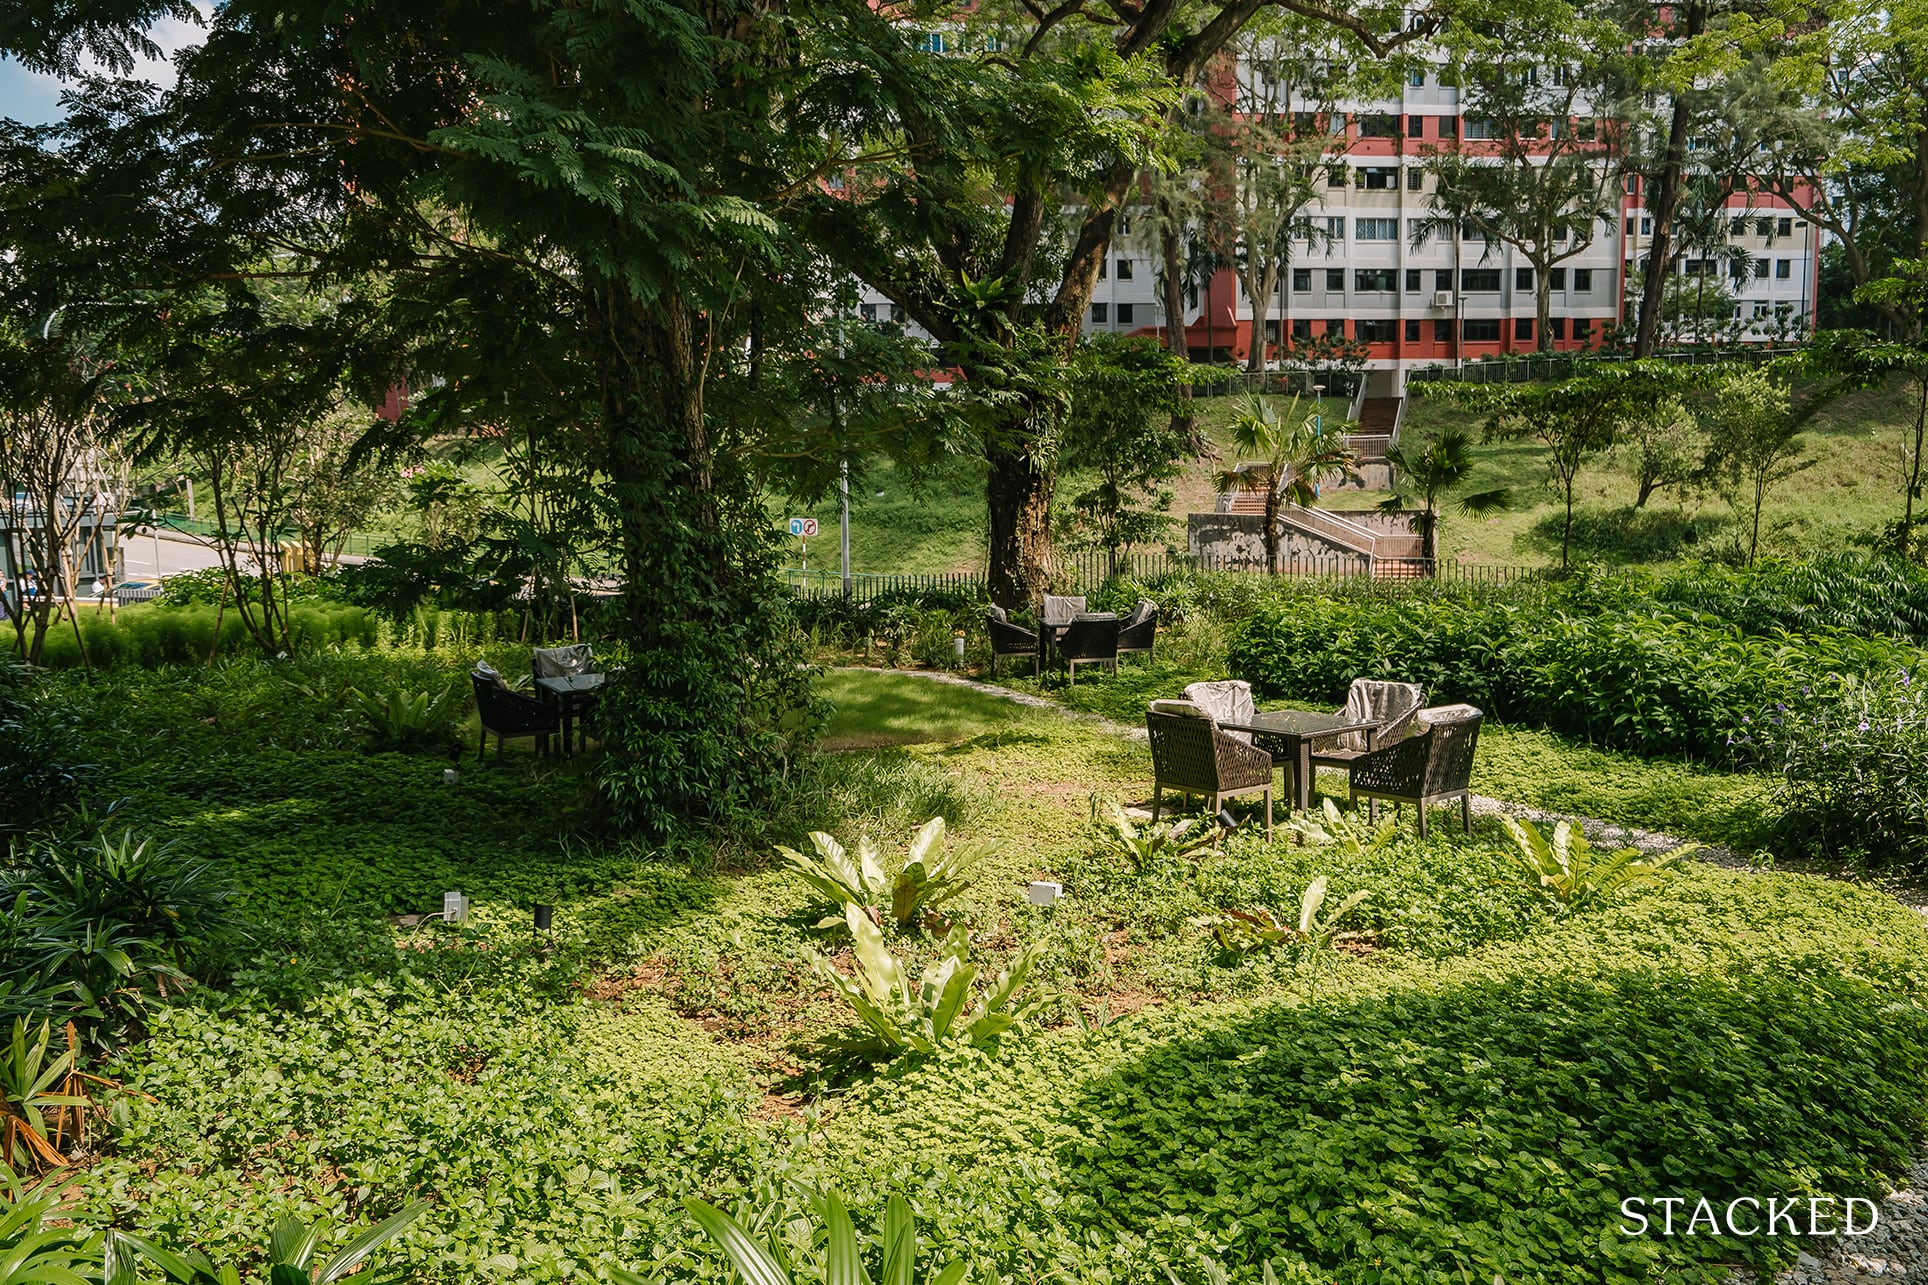 The Stirling Residences greenery